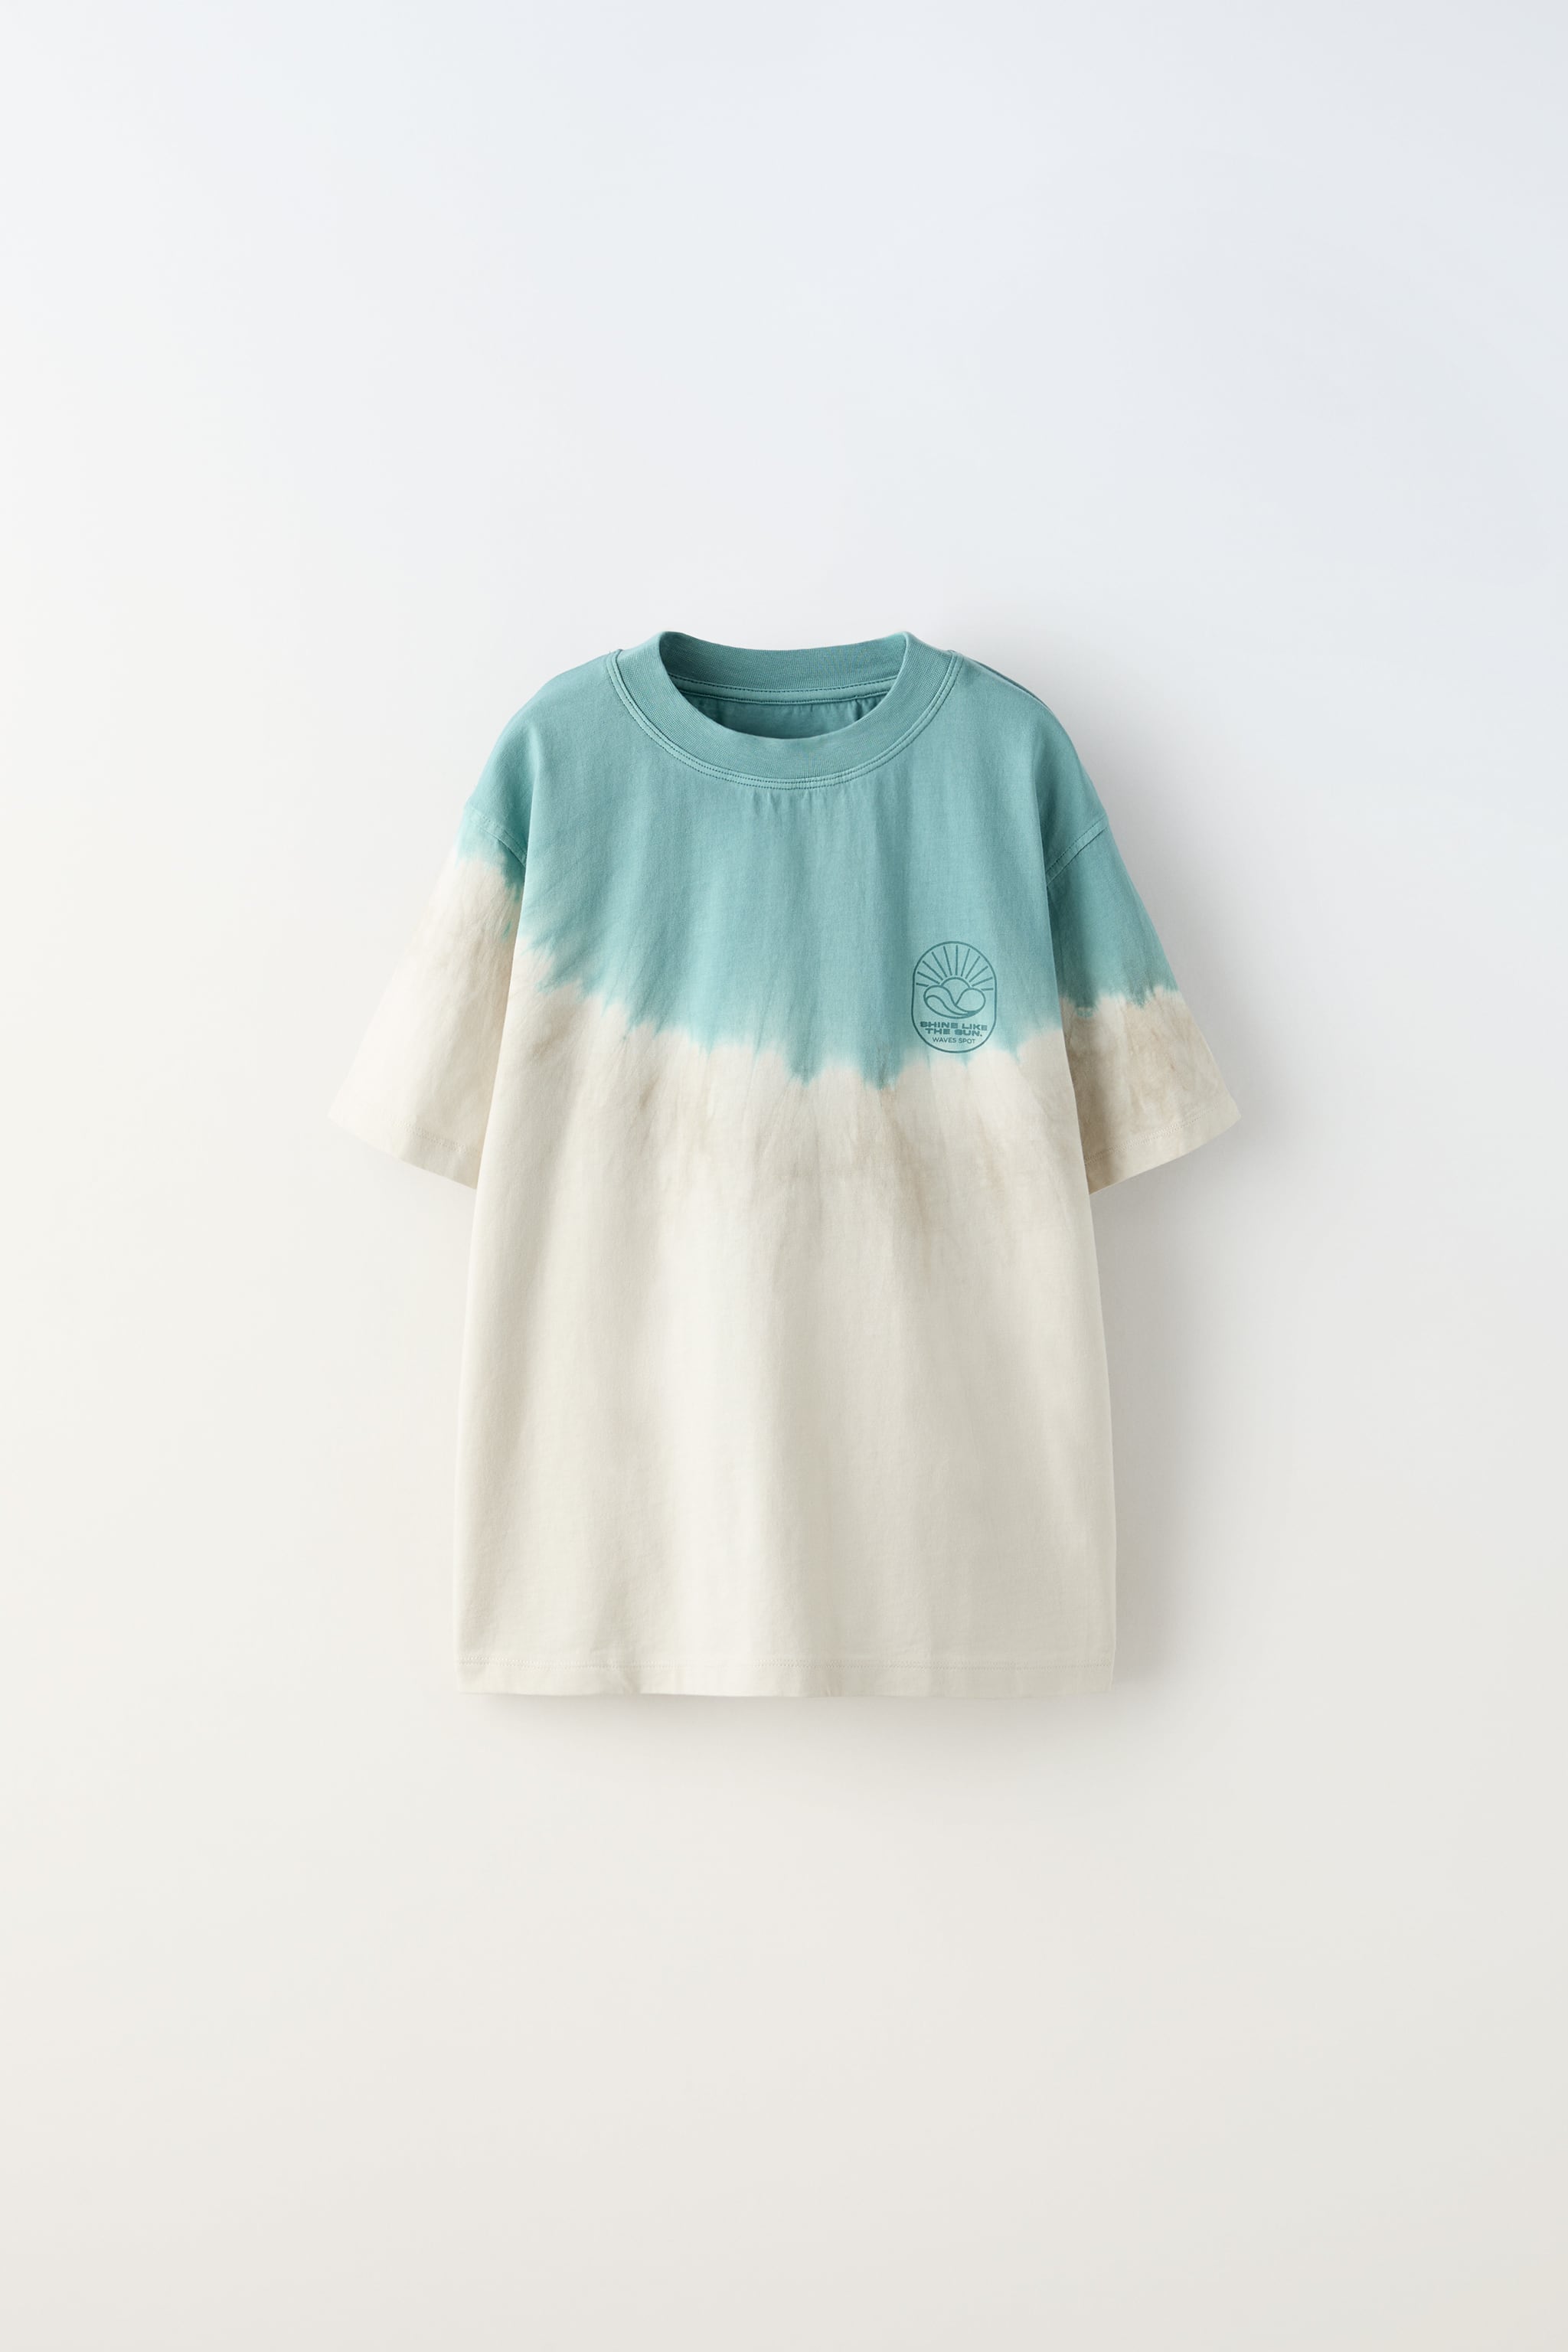 TIE DYE T-SHIRT WITH EMBROIDERY